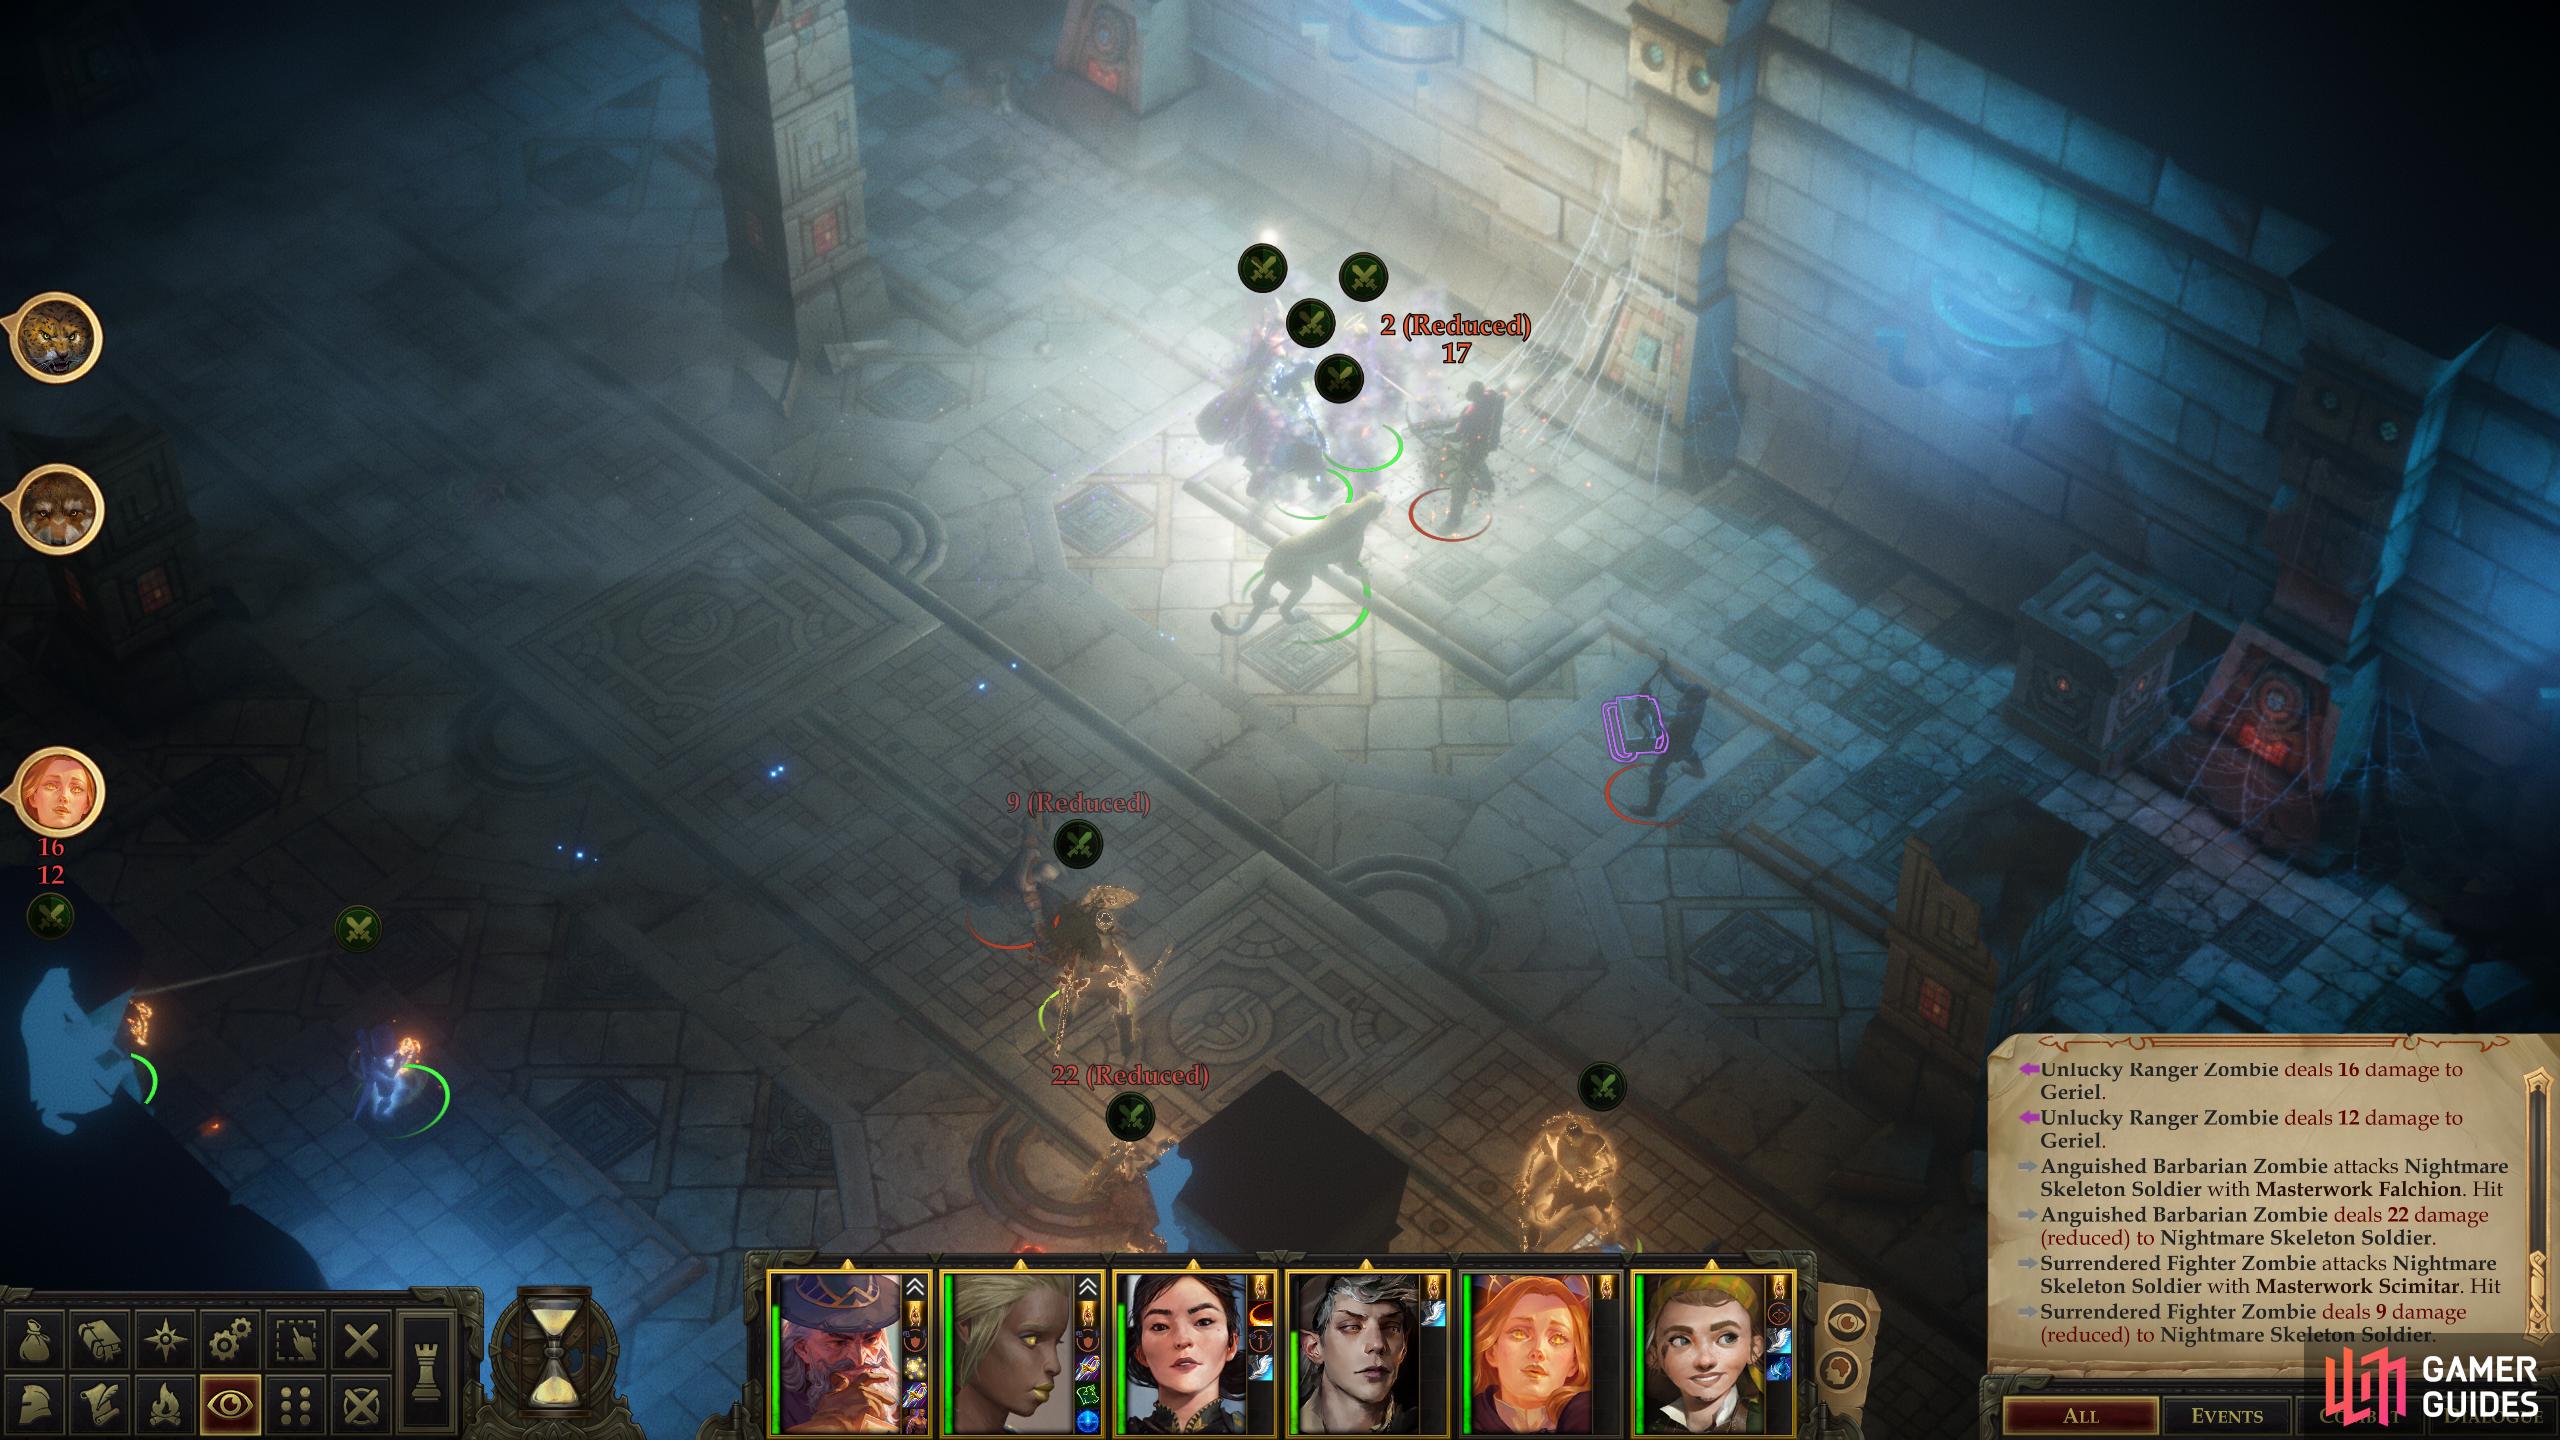 Take down the spellcasting zombie adventurers quickly to limit the mischief they can cause,